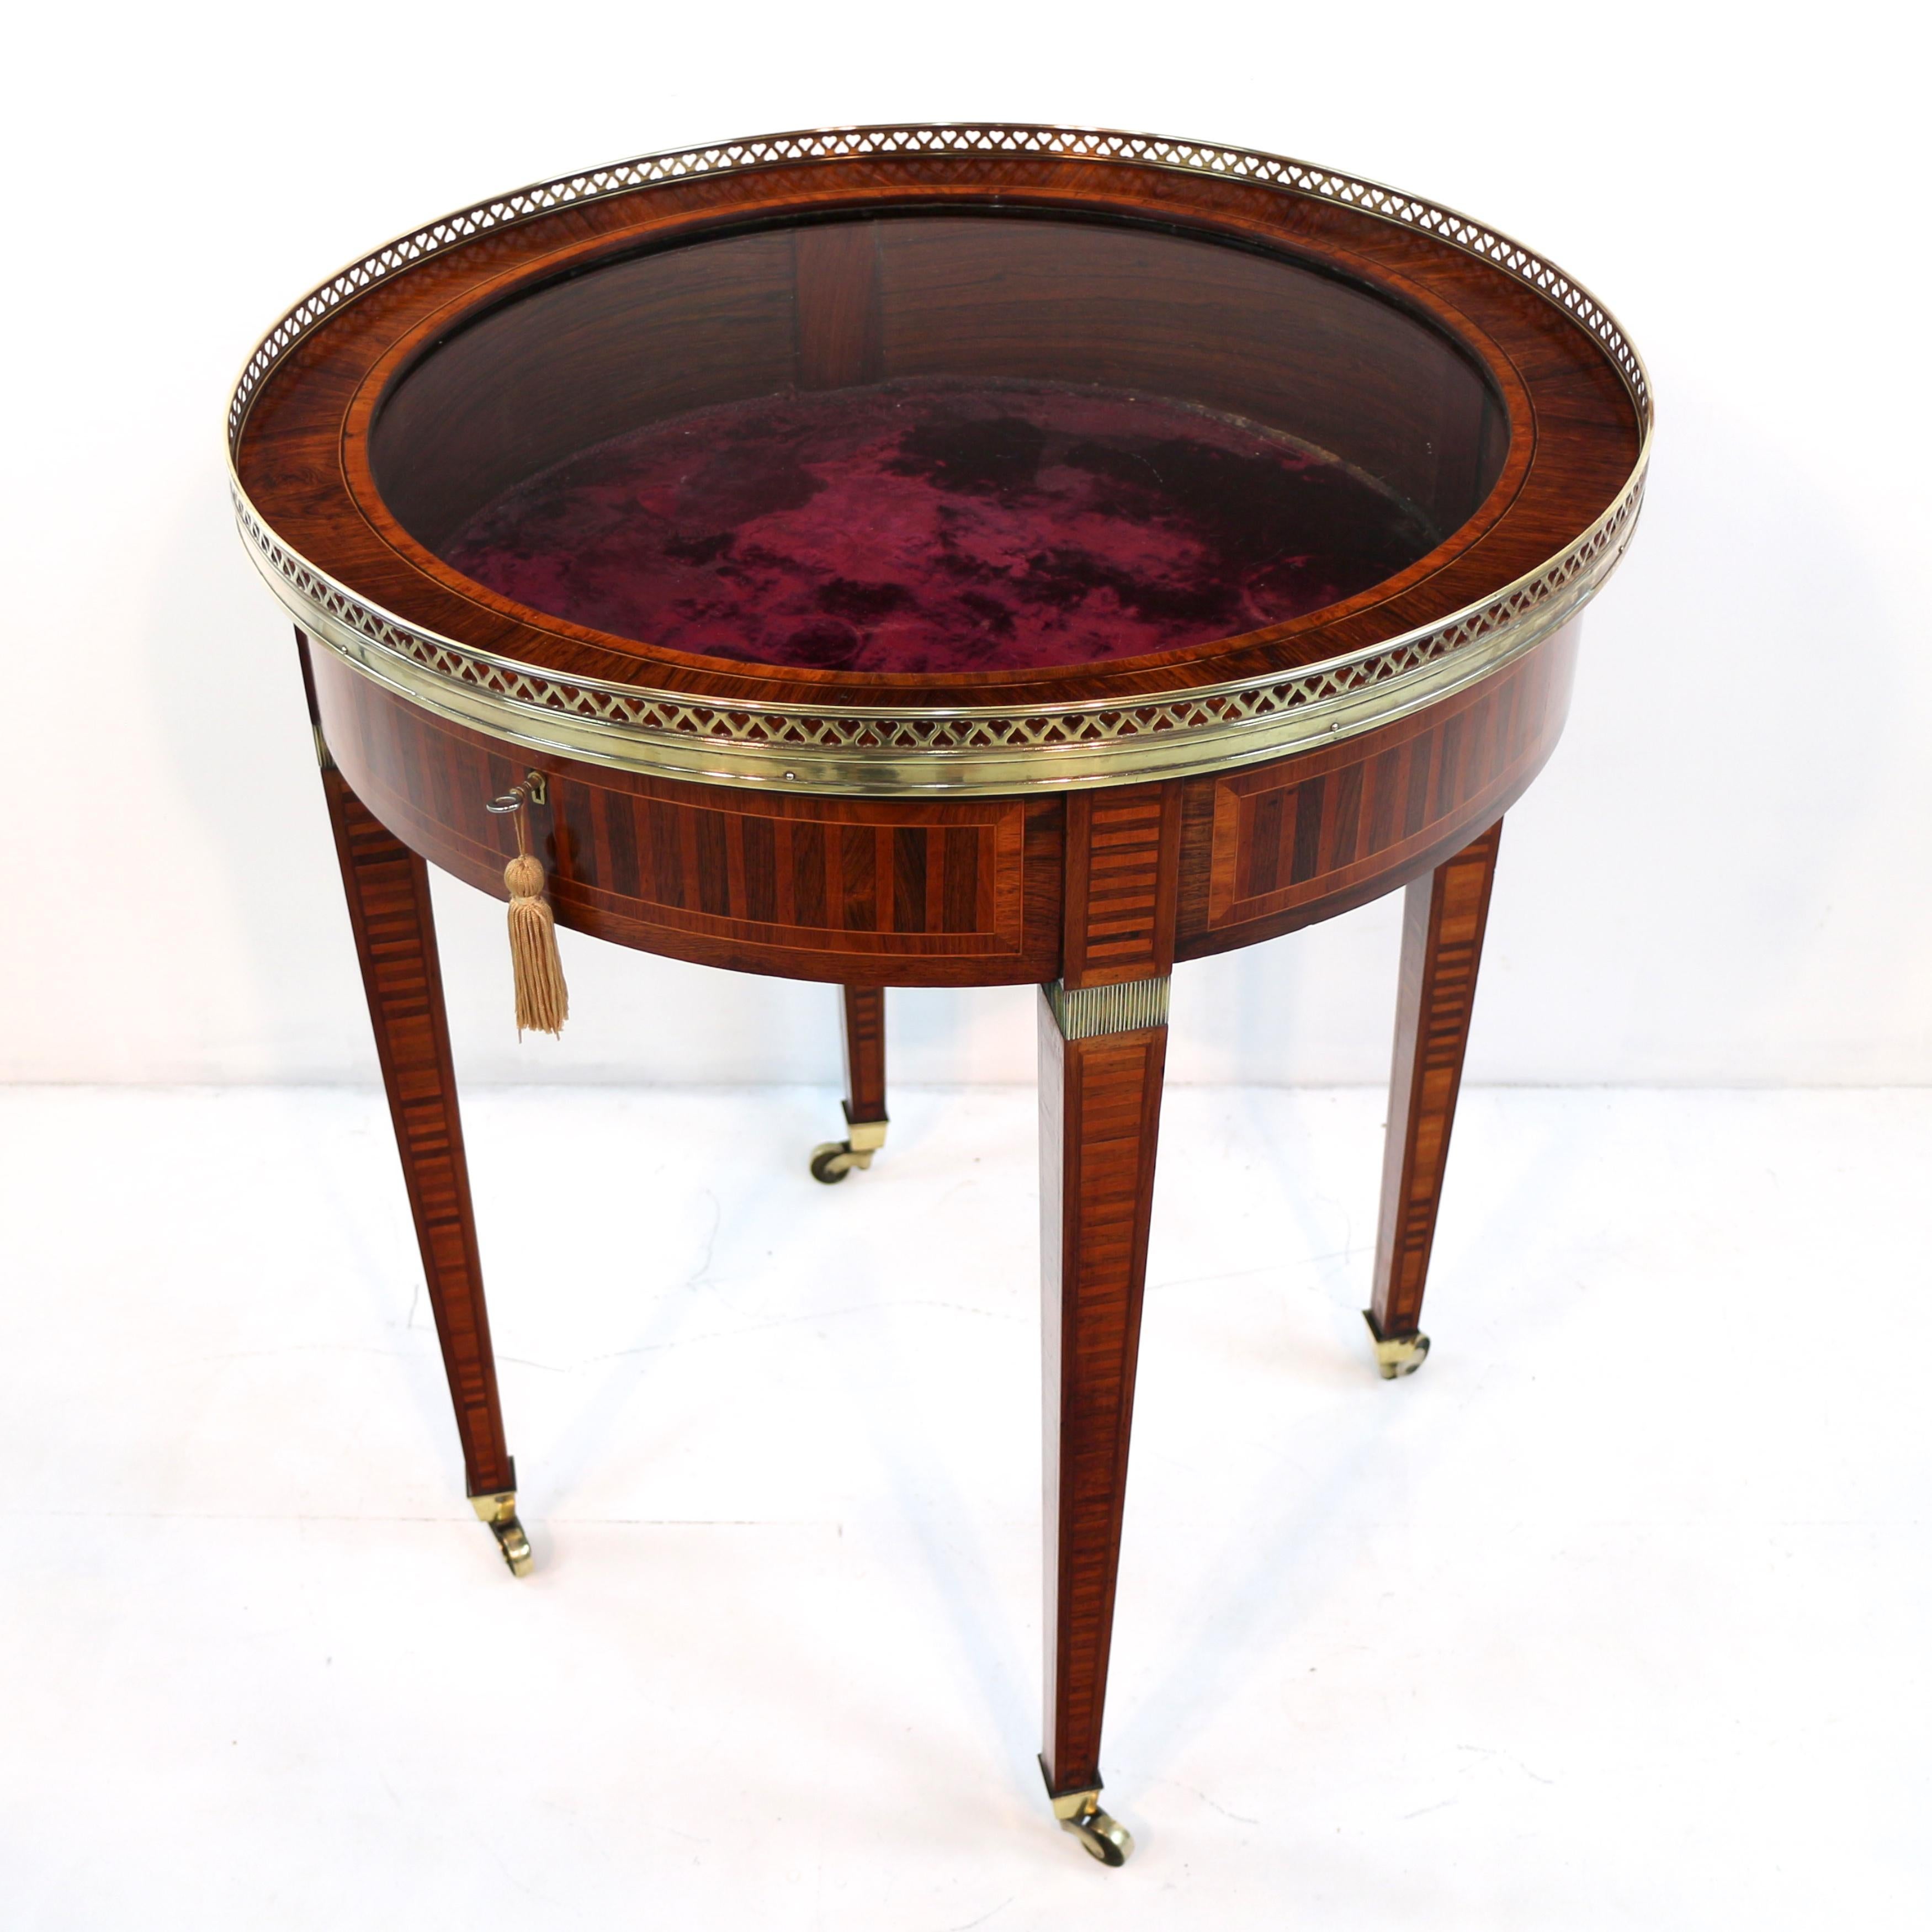 A superb quality English Victorian Sheraton Revival rosewood, parquetry inlaid and brass mounted bijouterie table dating to circa 1880. The circular hinged top with rosewood and satinwood crossbanding with box and ebonies stringing within a low